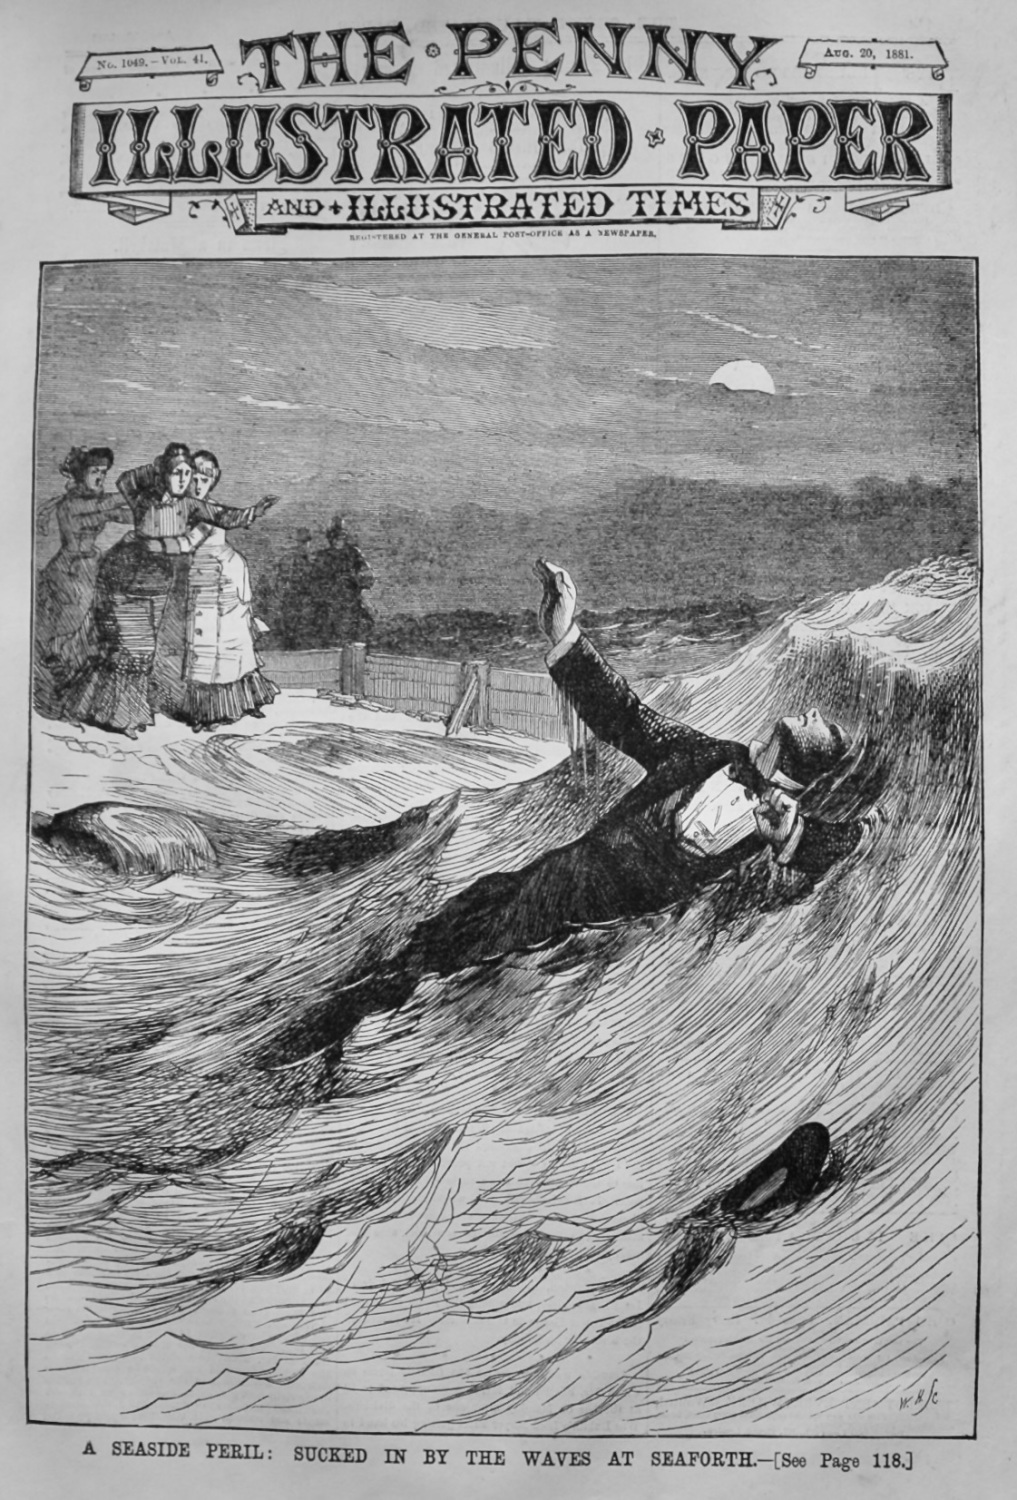 A Seaside Peril :  Sucked in by the Waves at Seaforth.  1881.